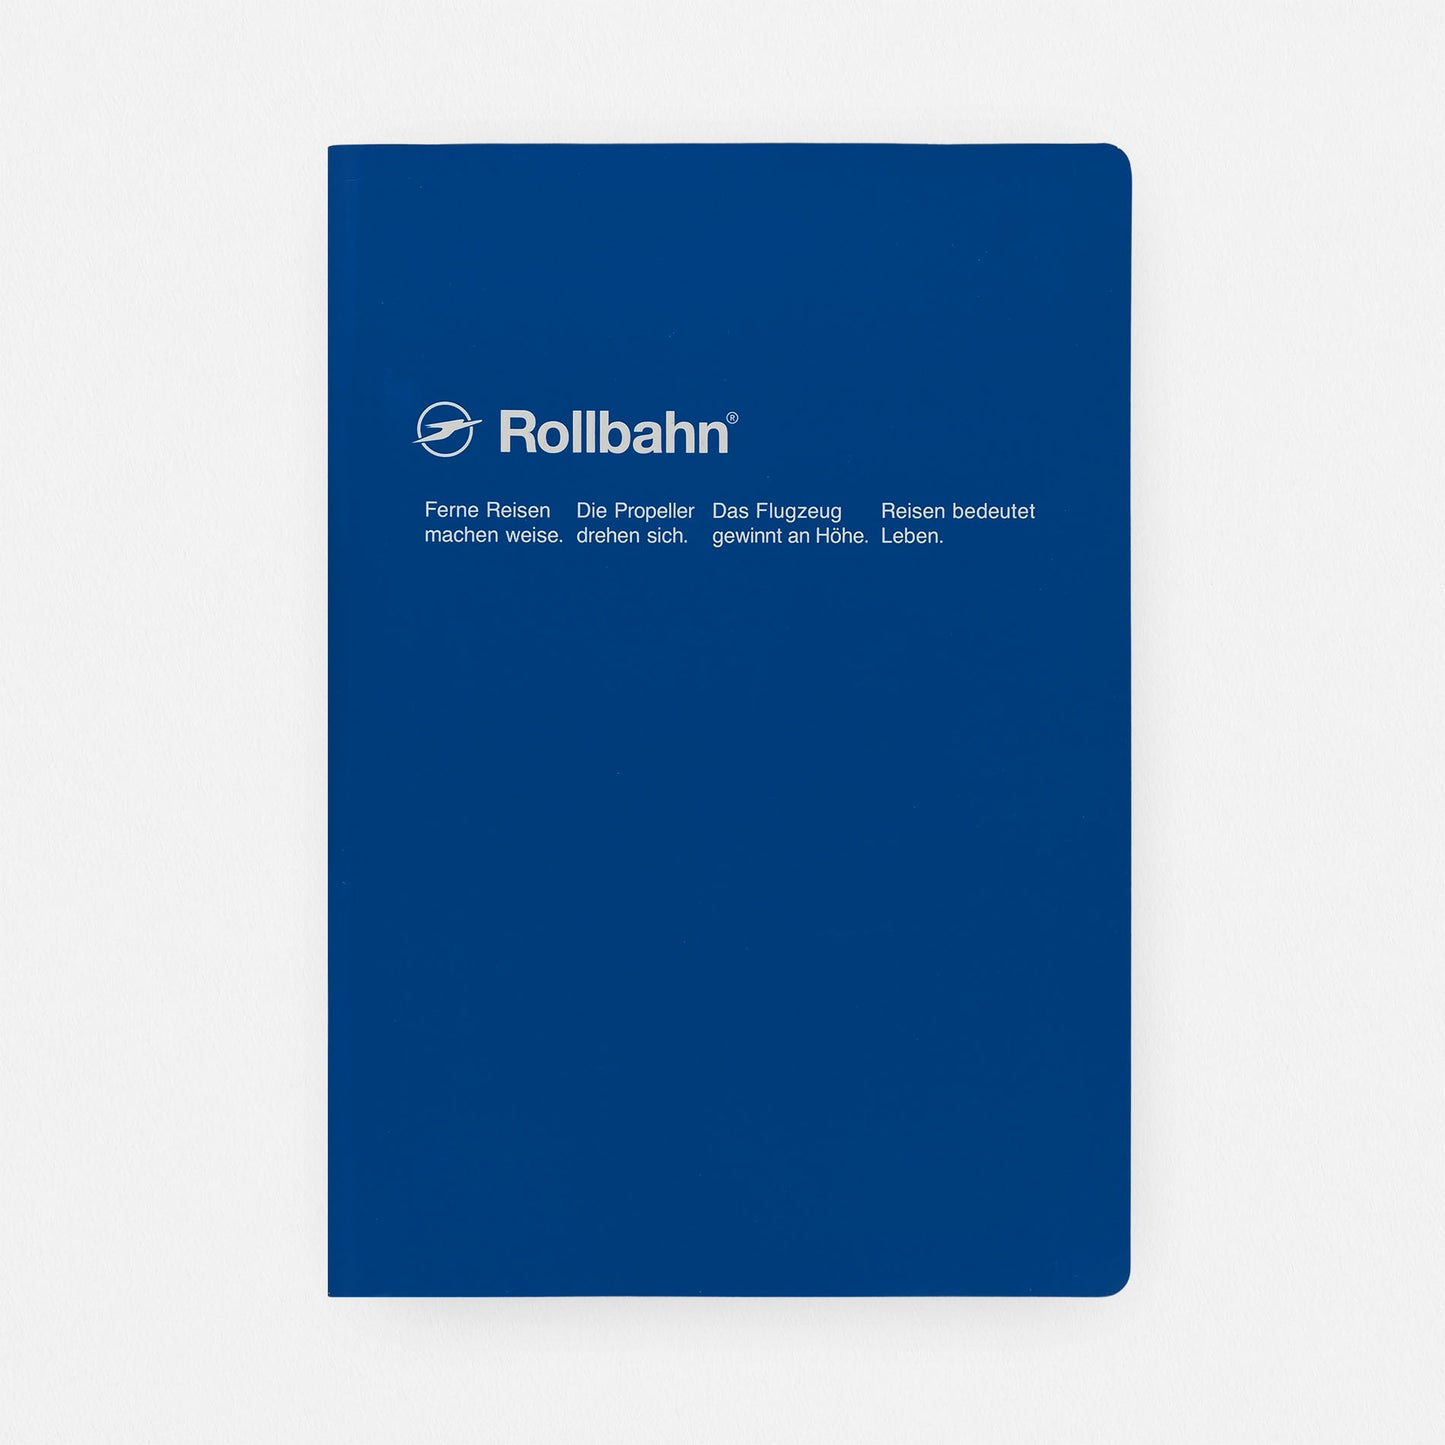 Delfonics Rollbahn "Note" Notebook Pocket, Large, A5 Or Extra Large  | 10 Colors Blue / Pocket A6 ( 4 x 6")